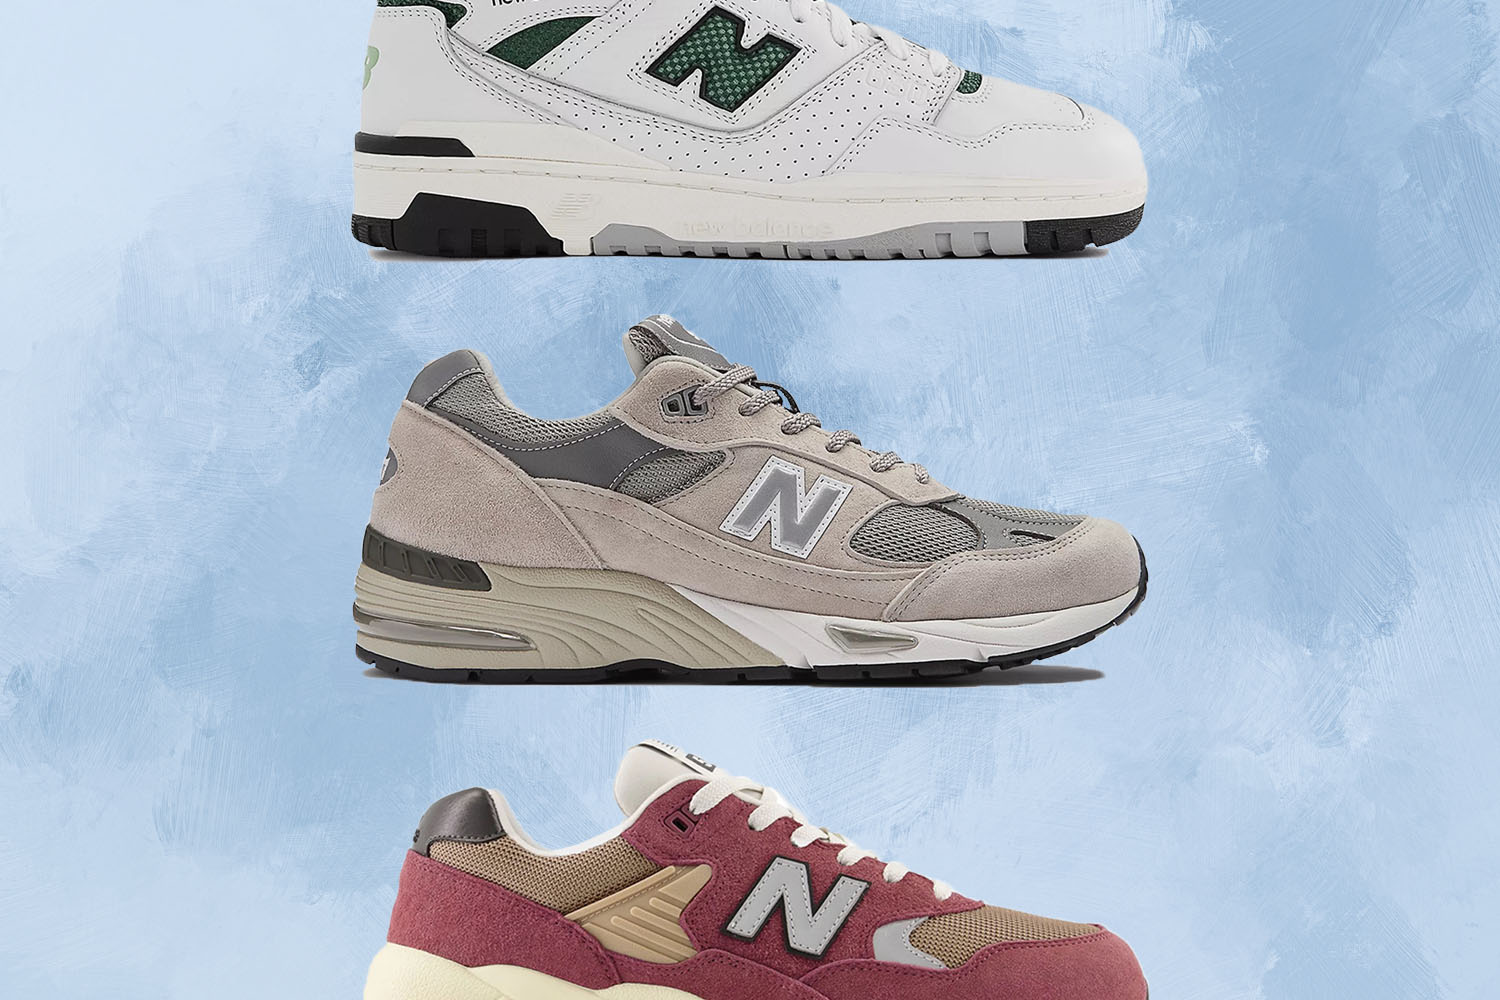 Looking for modern New Balance outfits? Style your New Balance 550